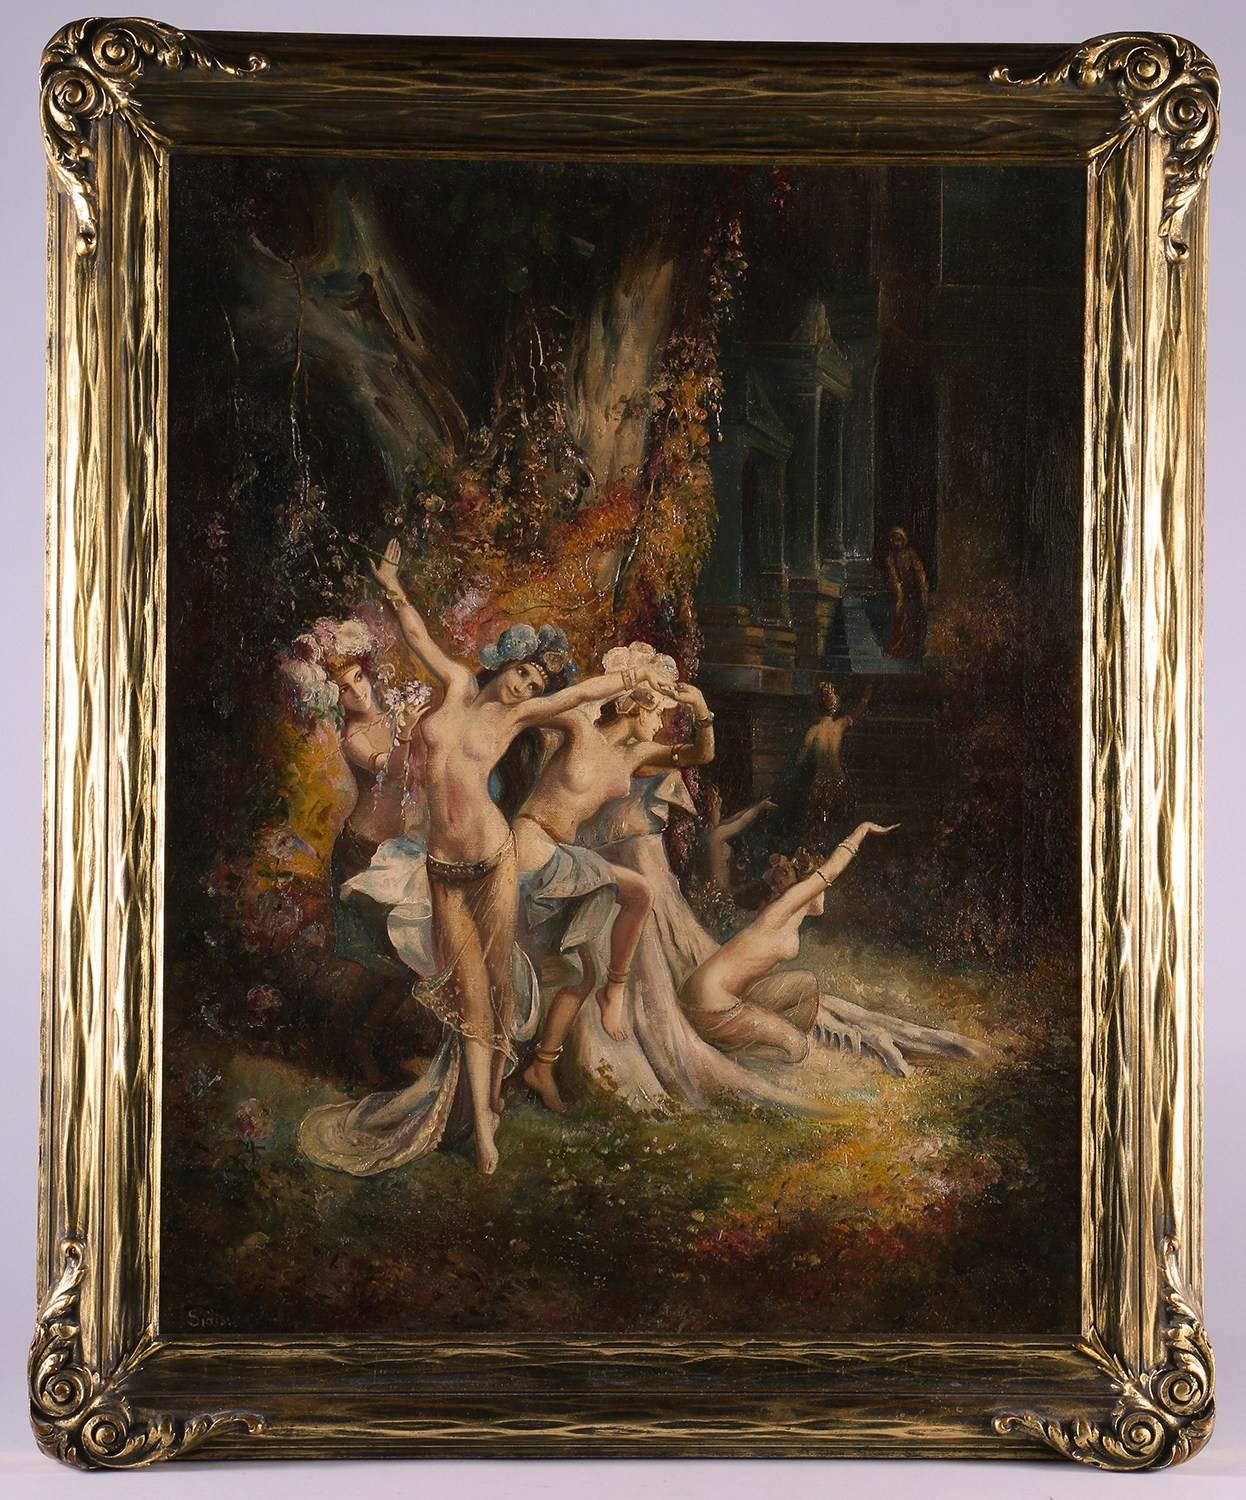 Unknown Nude Painting - The Forest Nymphs